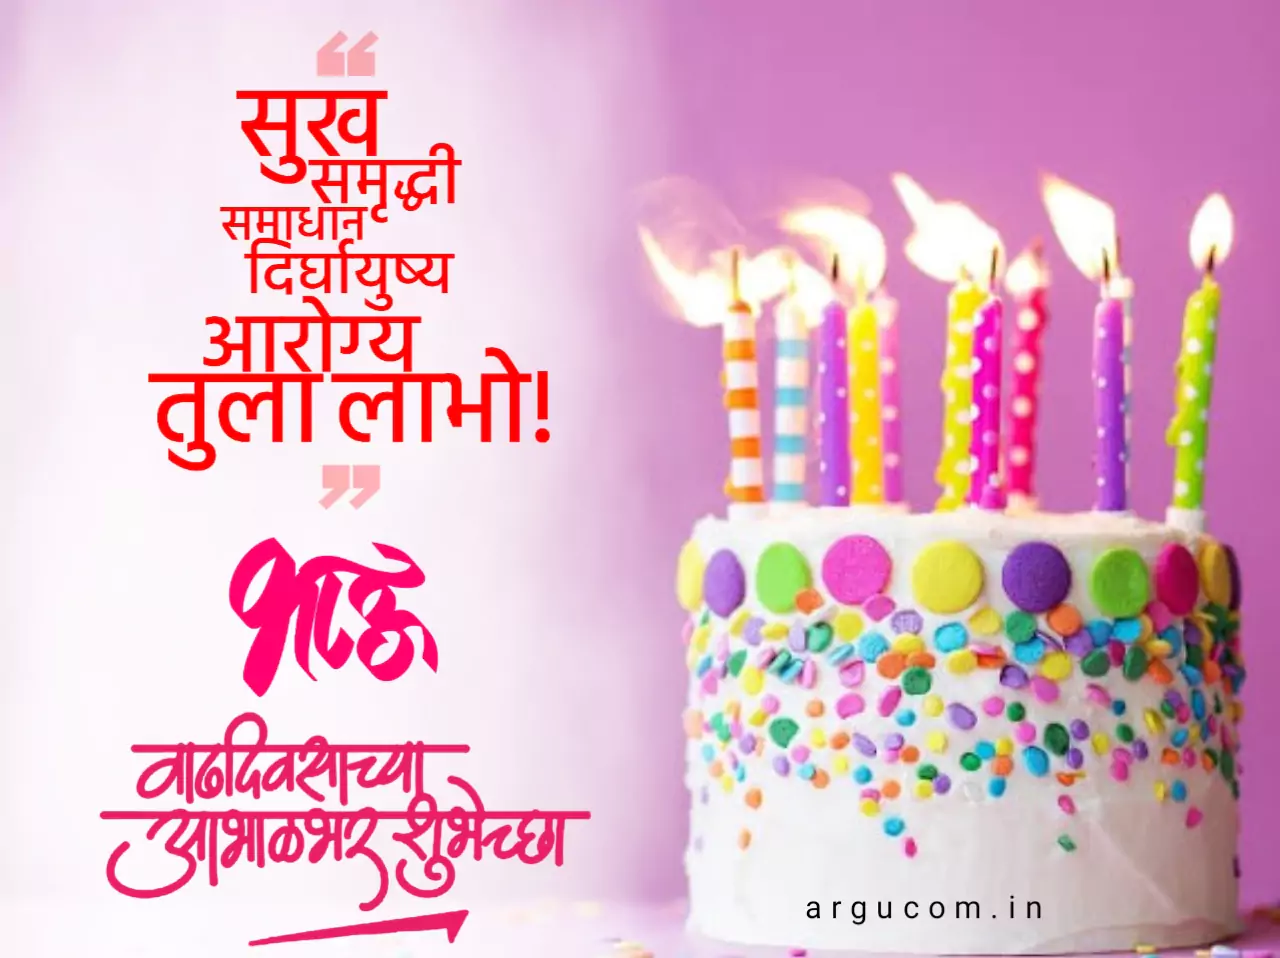 Birthday Image for brother in marathi